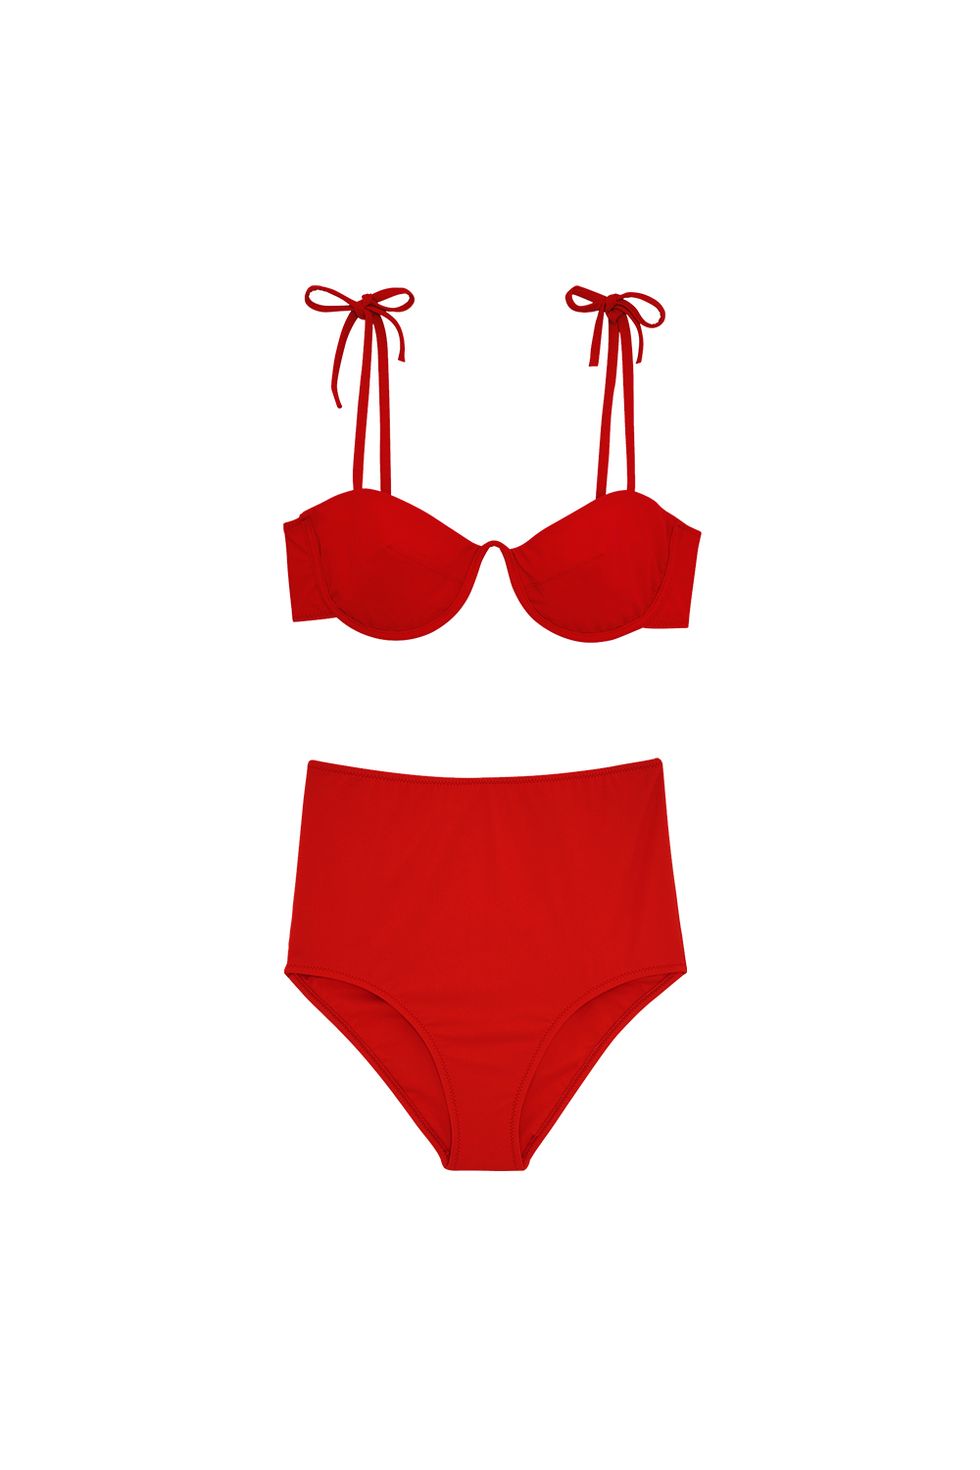 13 Red Bathing Suits Inspired By Baywatch - Best Red One-Pieces ...